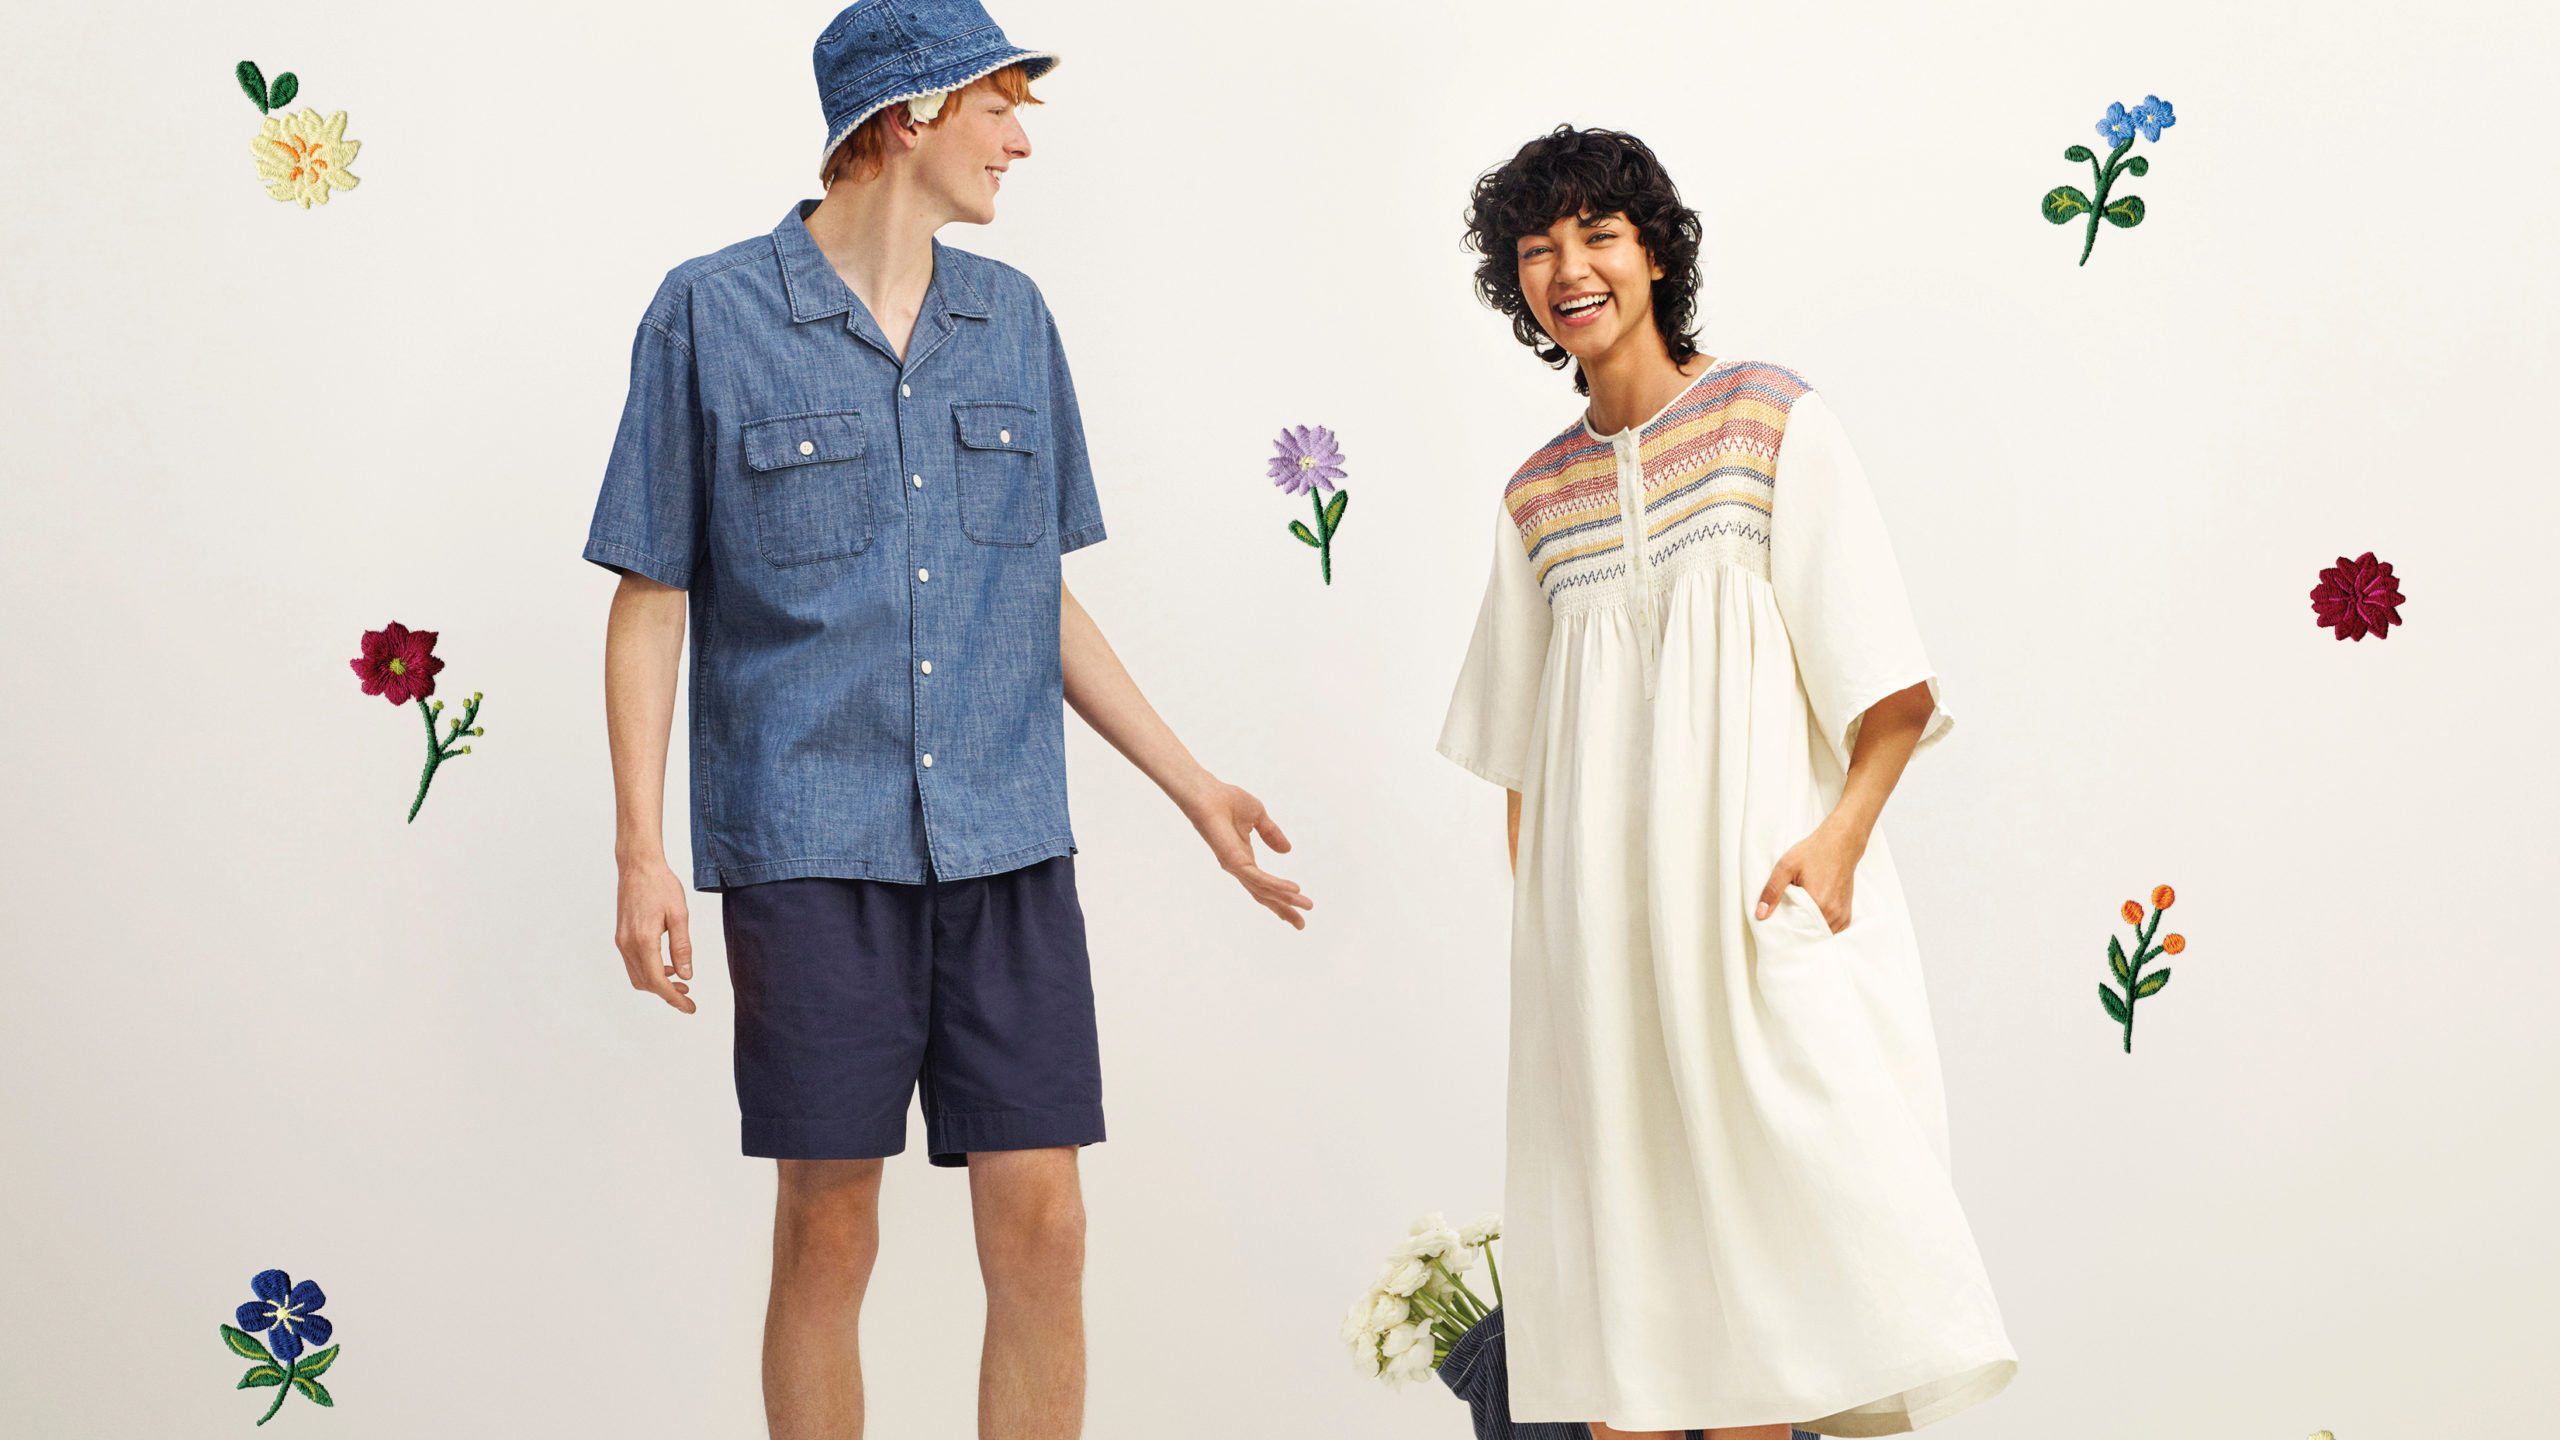 The latest Uniqlo and JW Anderson SS21 Collection is all about joyful new beginnings